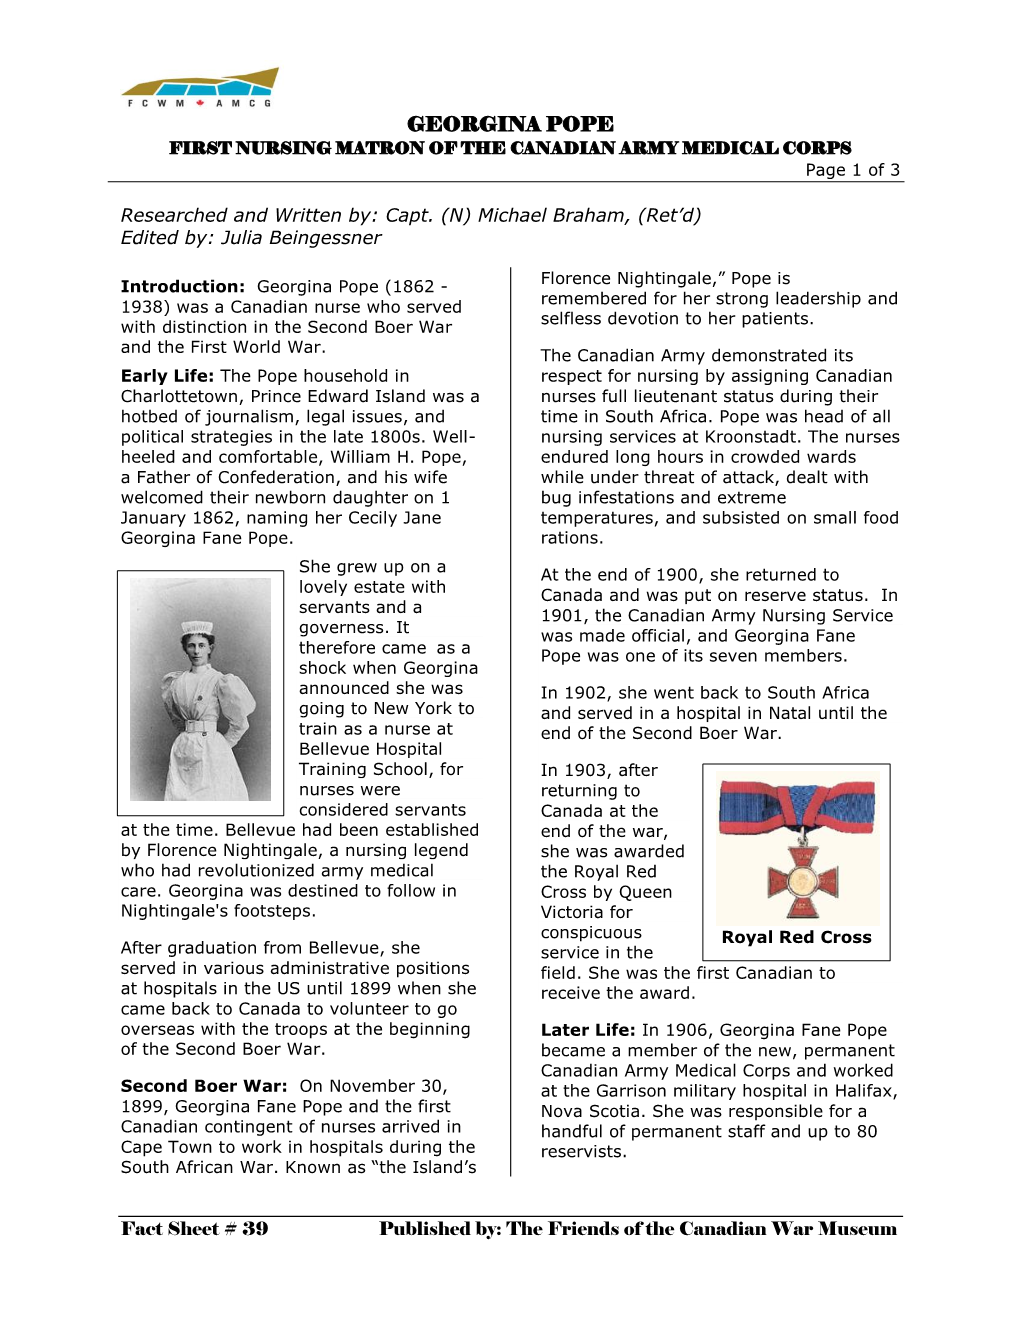 Fact Sheet # 39 Published By: the Friends of the Canadian War Museum